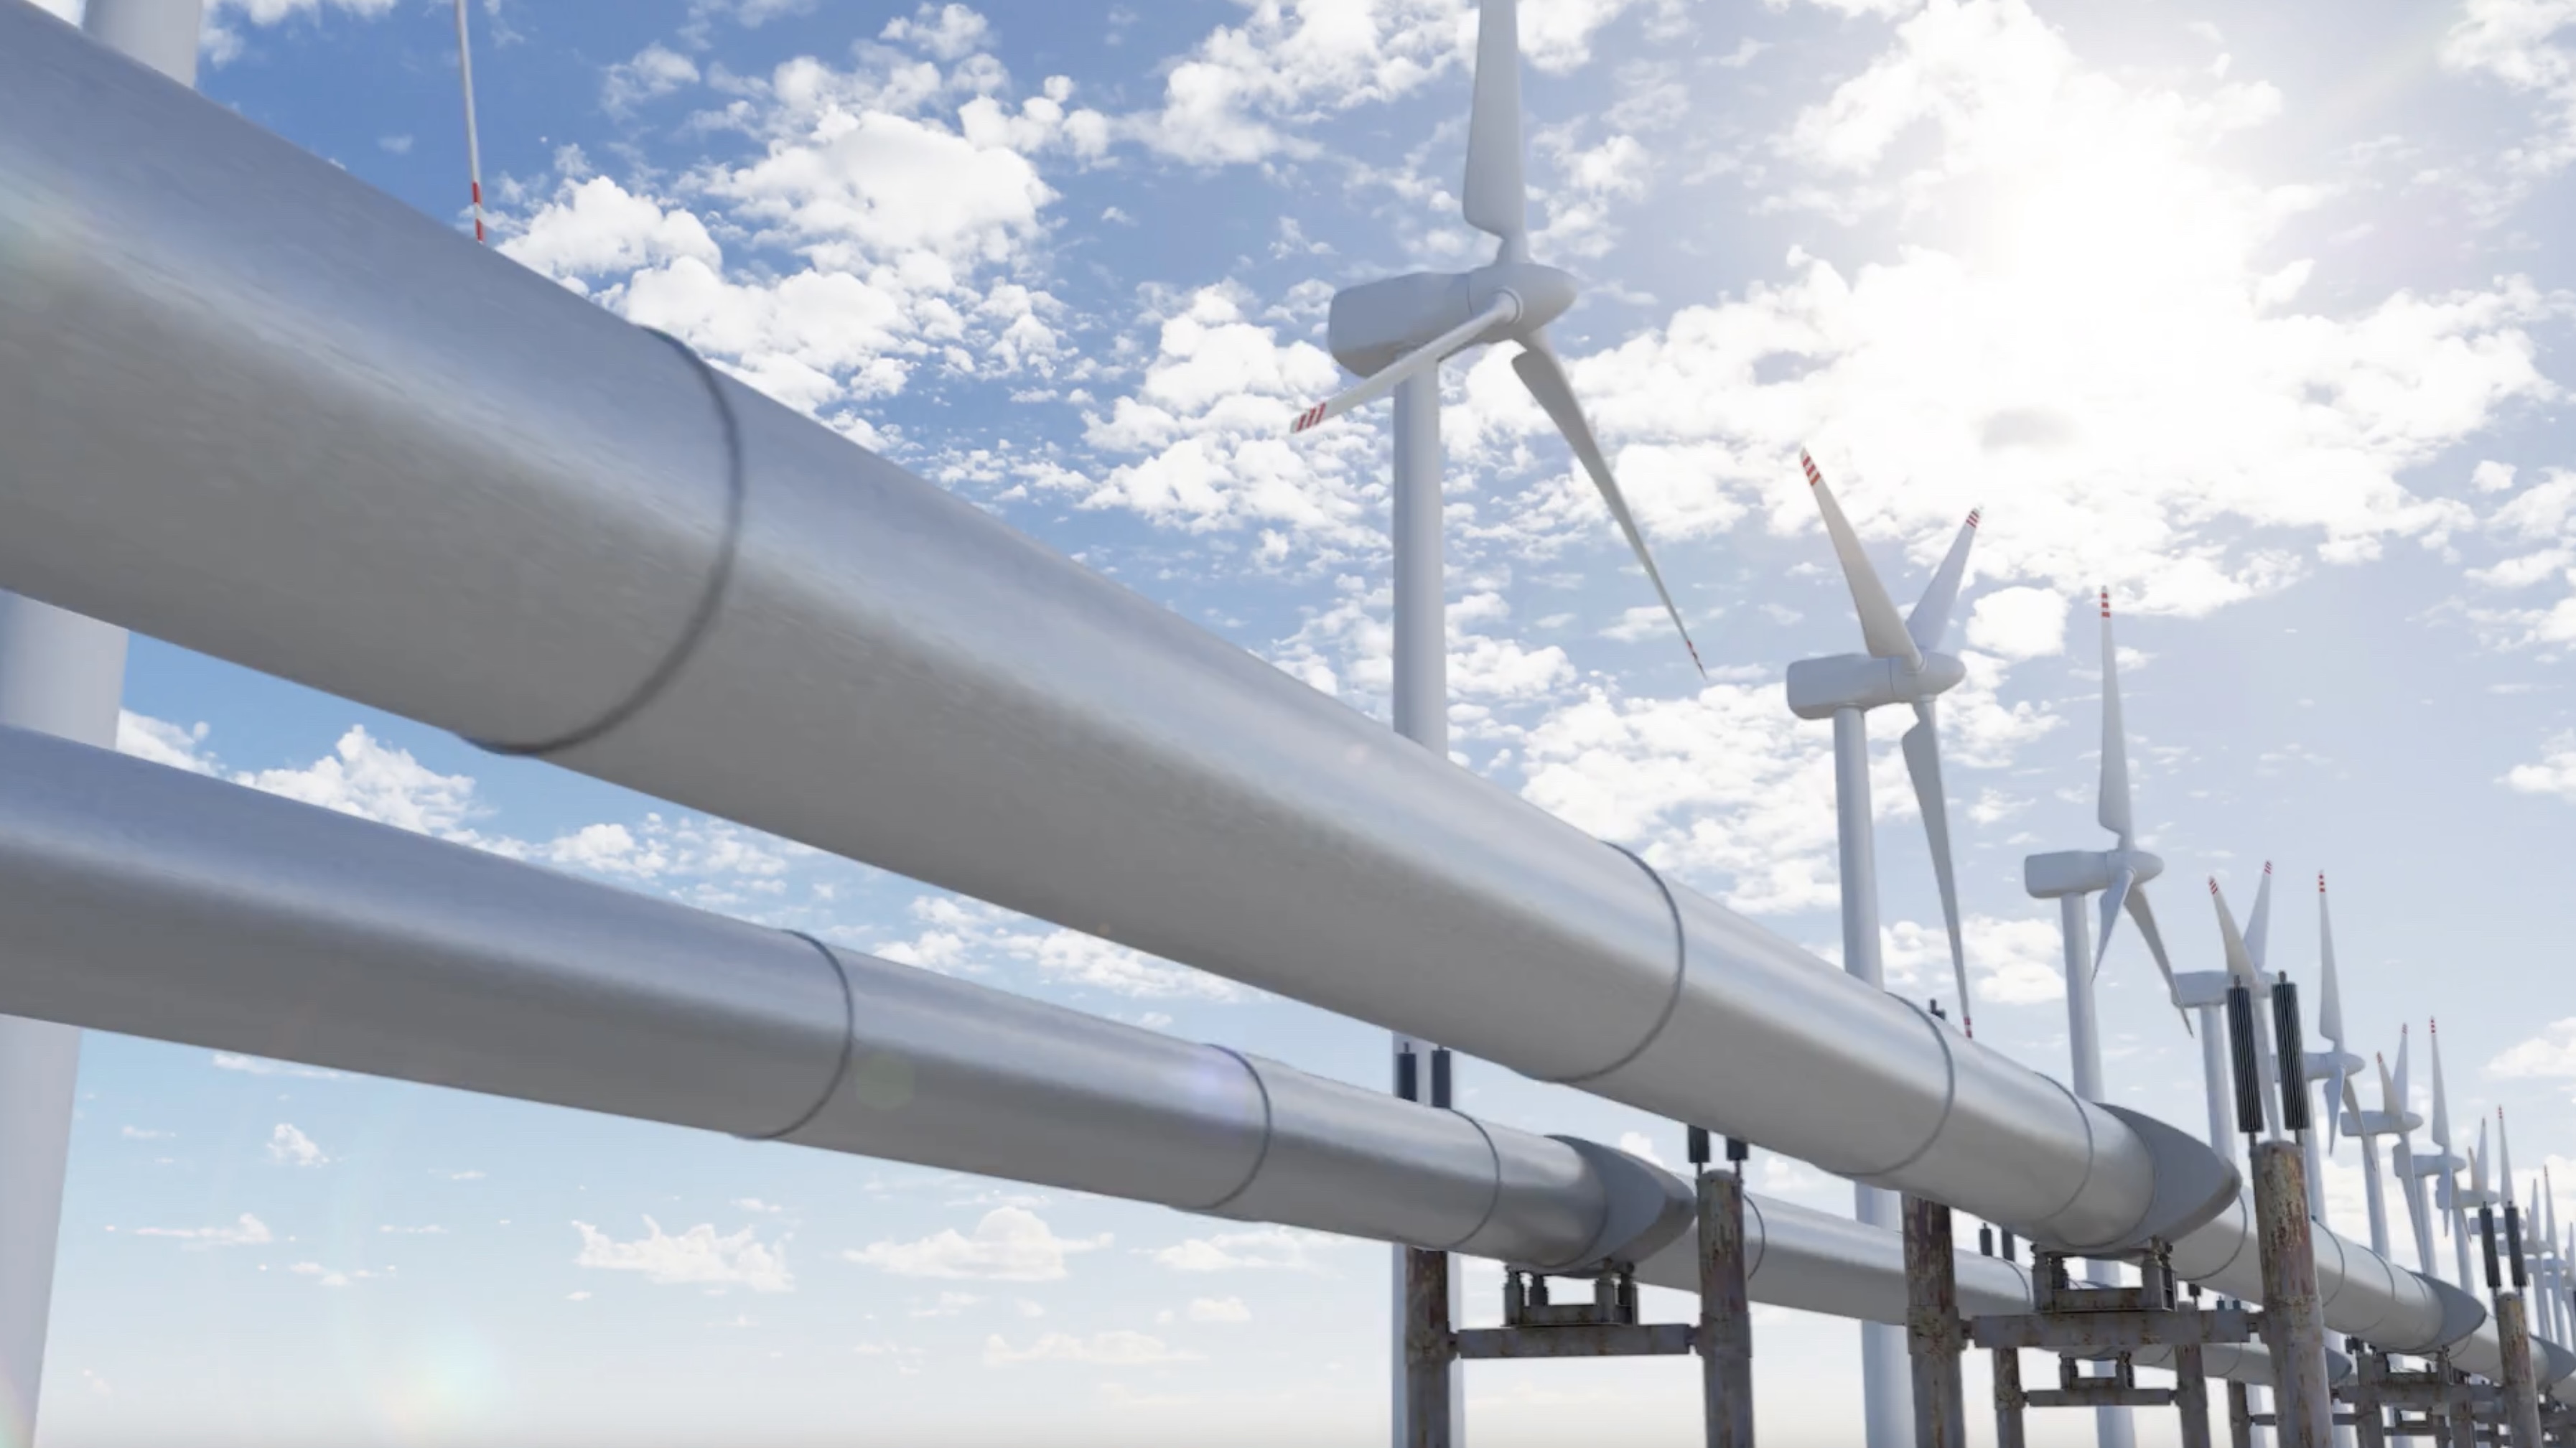 image of pipeline and wind turbines